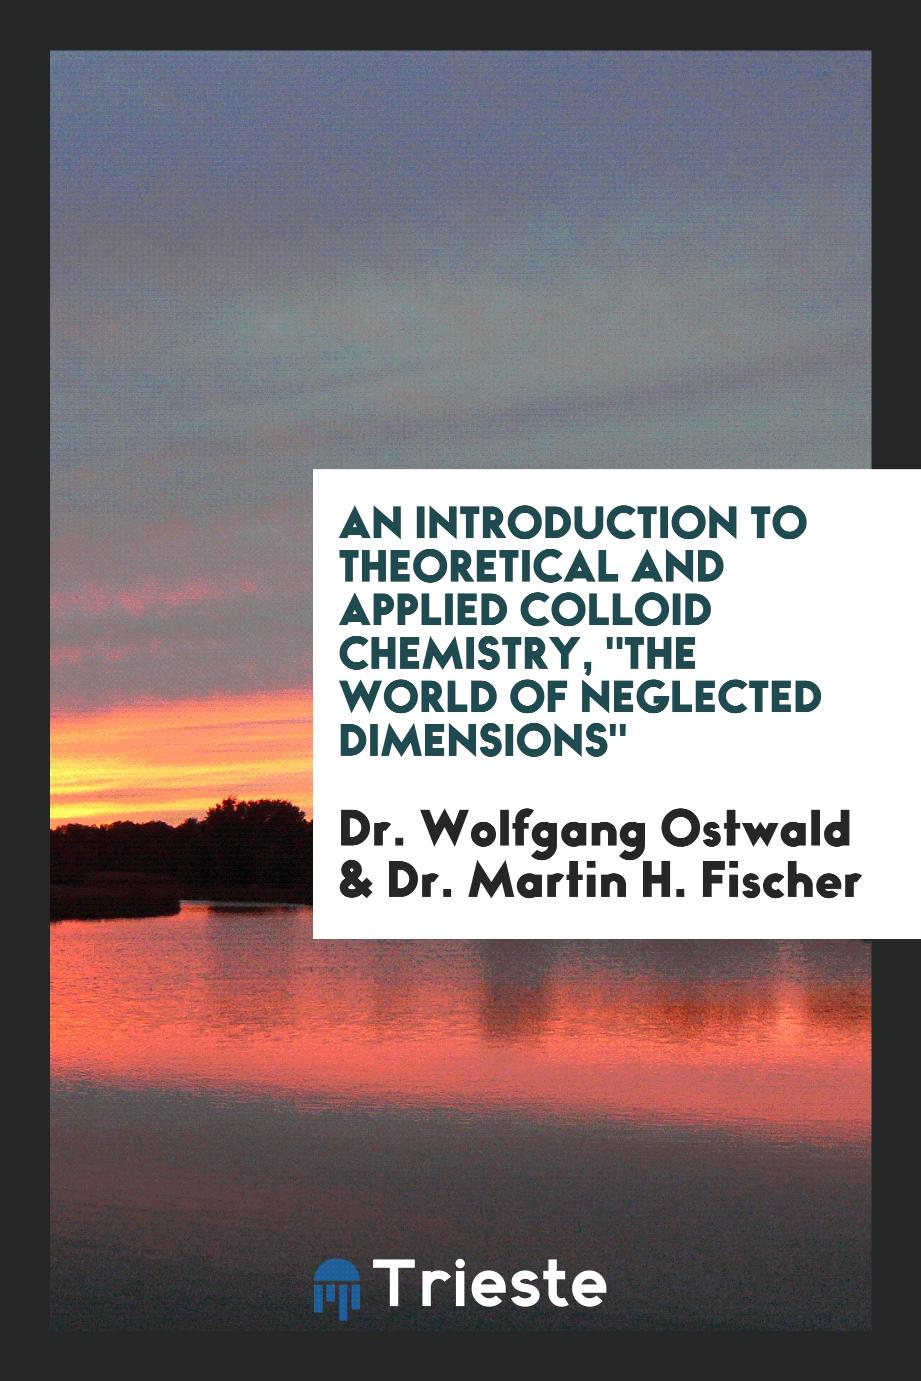 An Introduction to Theoretical and Applied Colloid Chemistry, "The World of Neglected Dimensions"